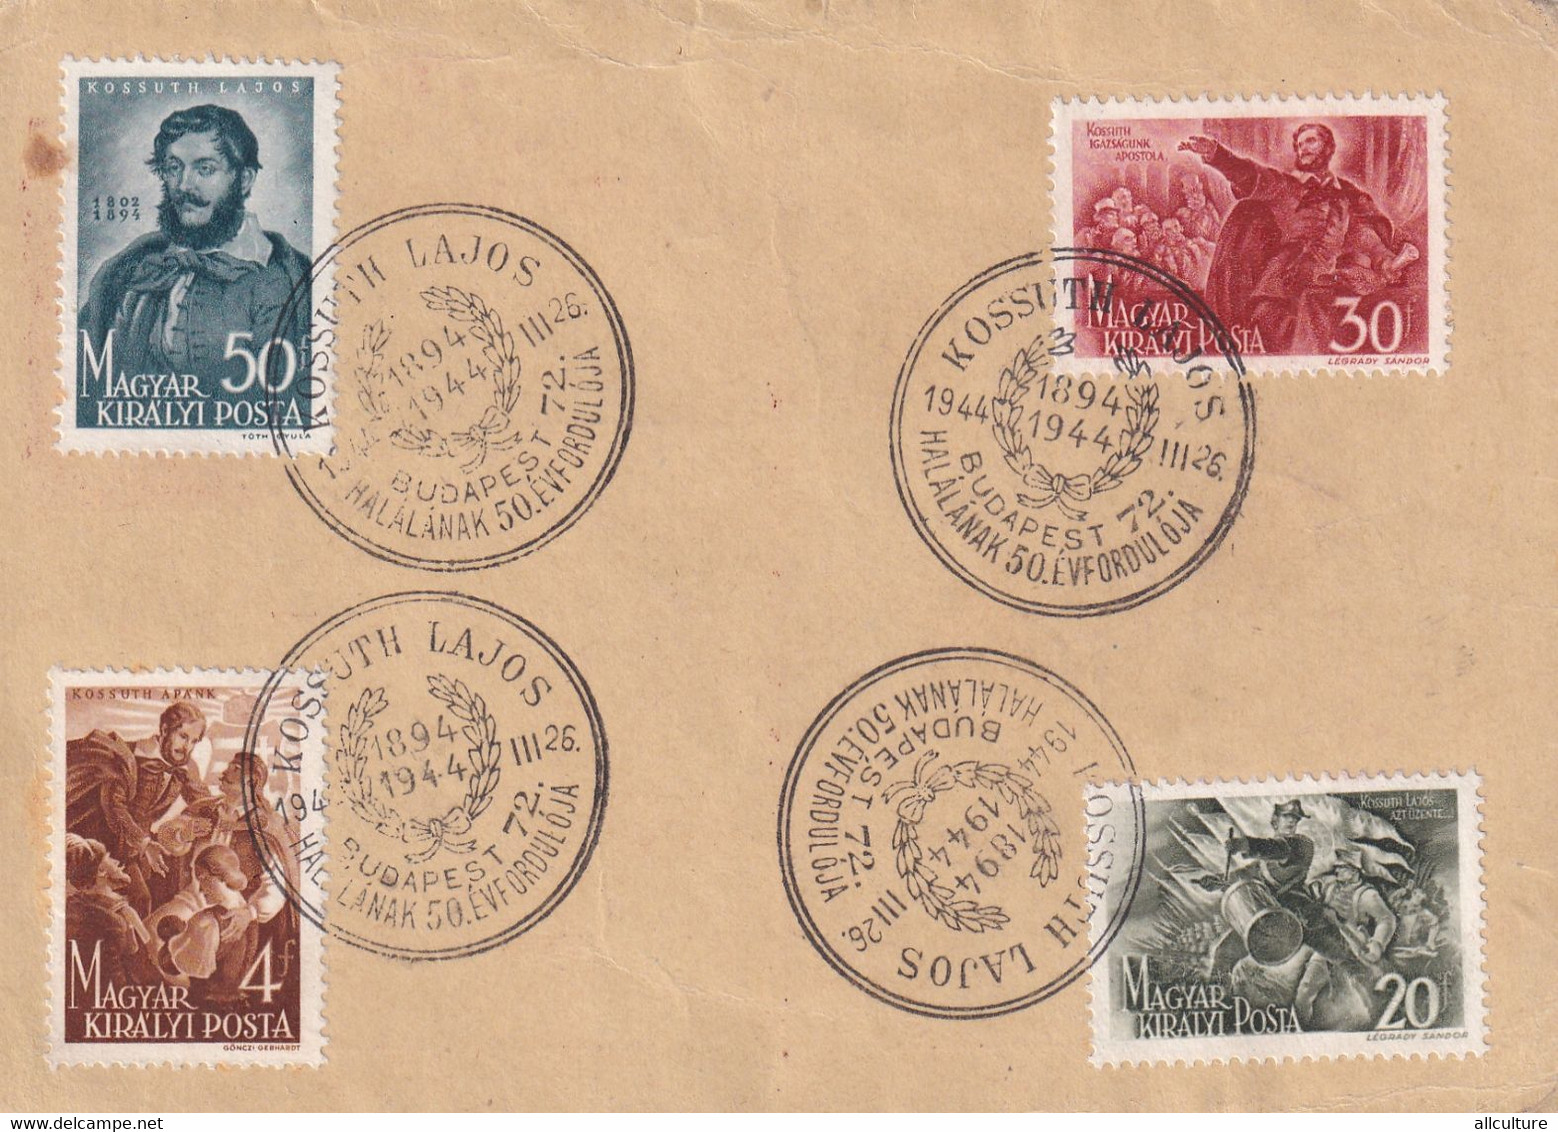 A8702 - 1944 Debrecen Hungary Postcard Cover To Vac Kossuth Lajos Stamp Issue - Ganzsachen